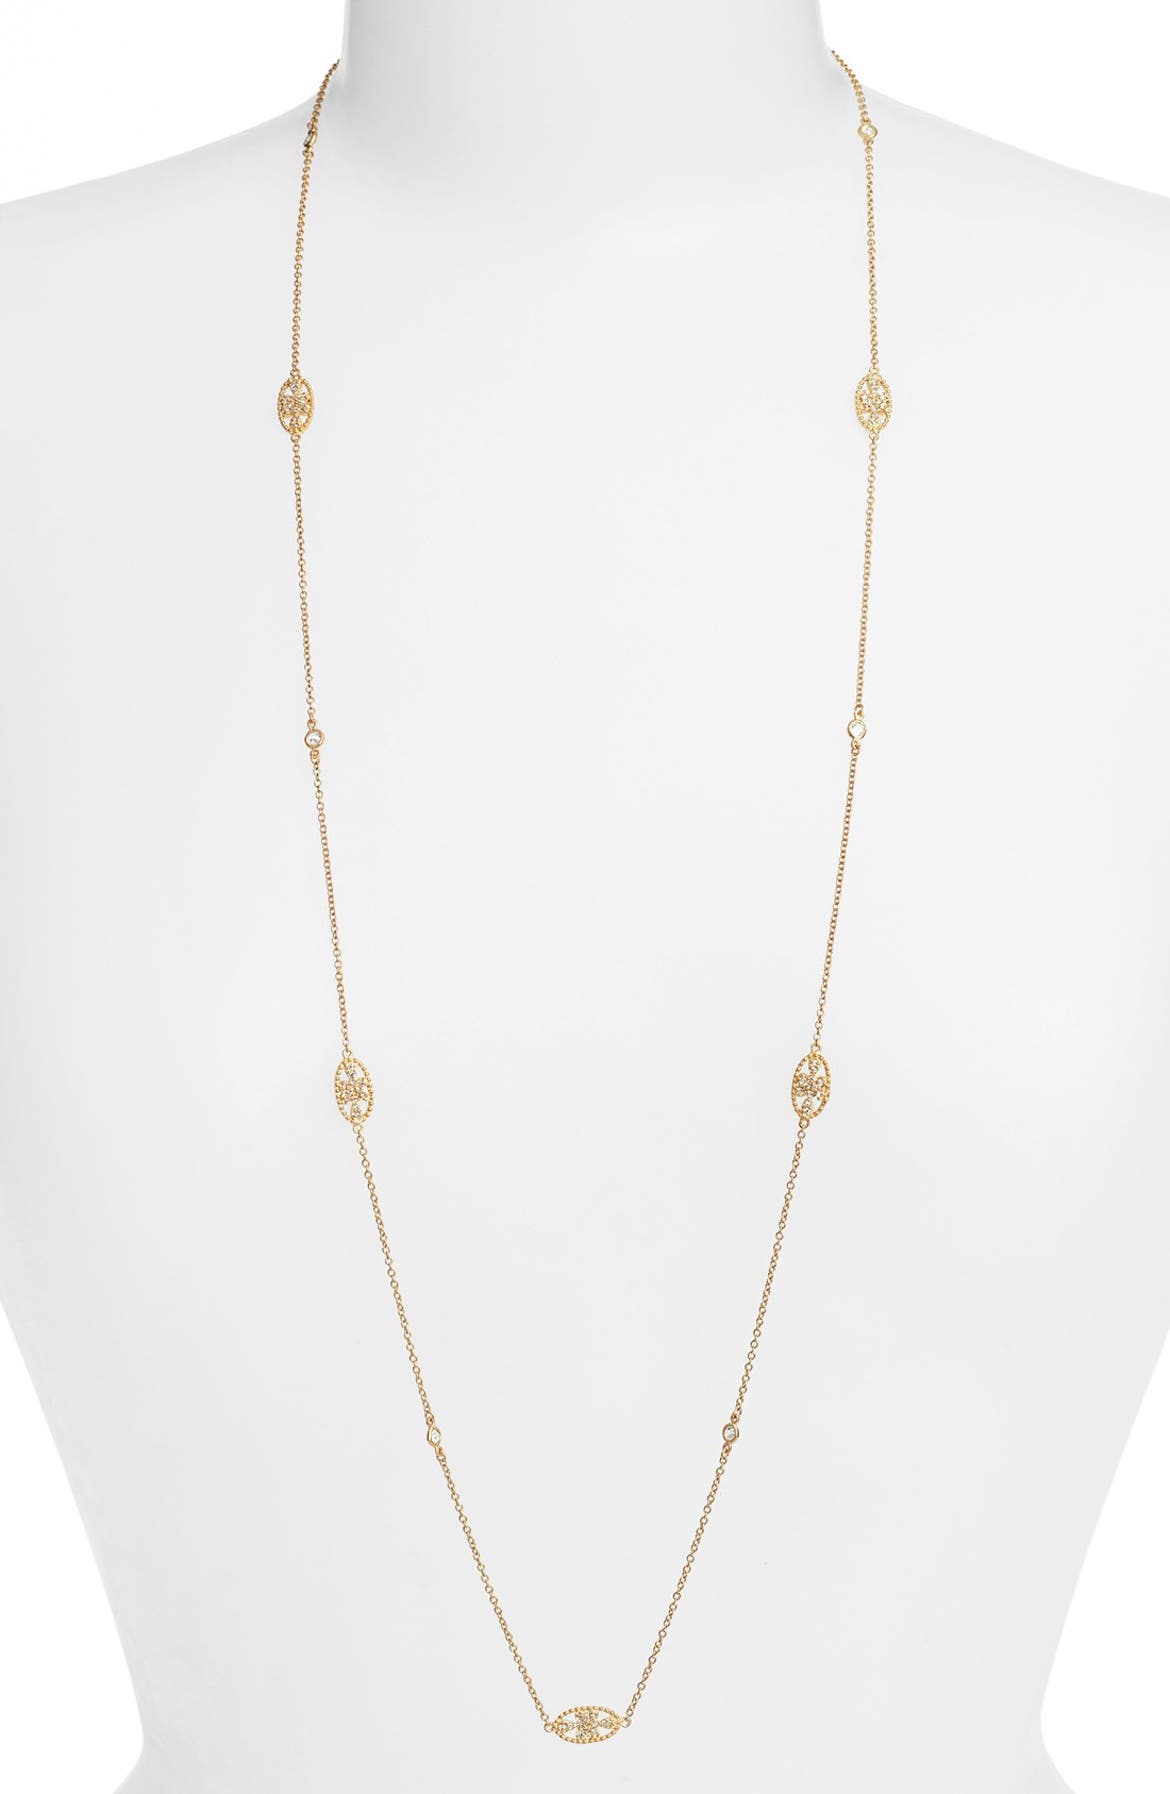 FREIDA ROTHMAN 'The Standards' Long Love Knot Station Necklace | Nordstrom